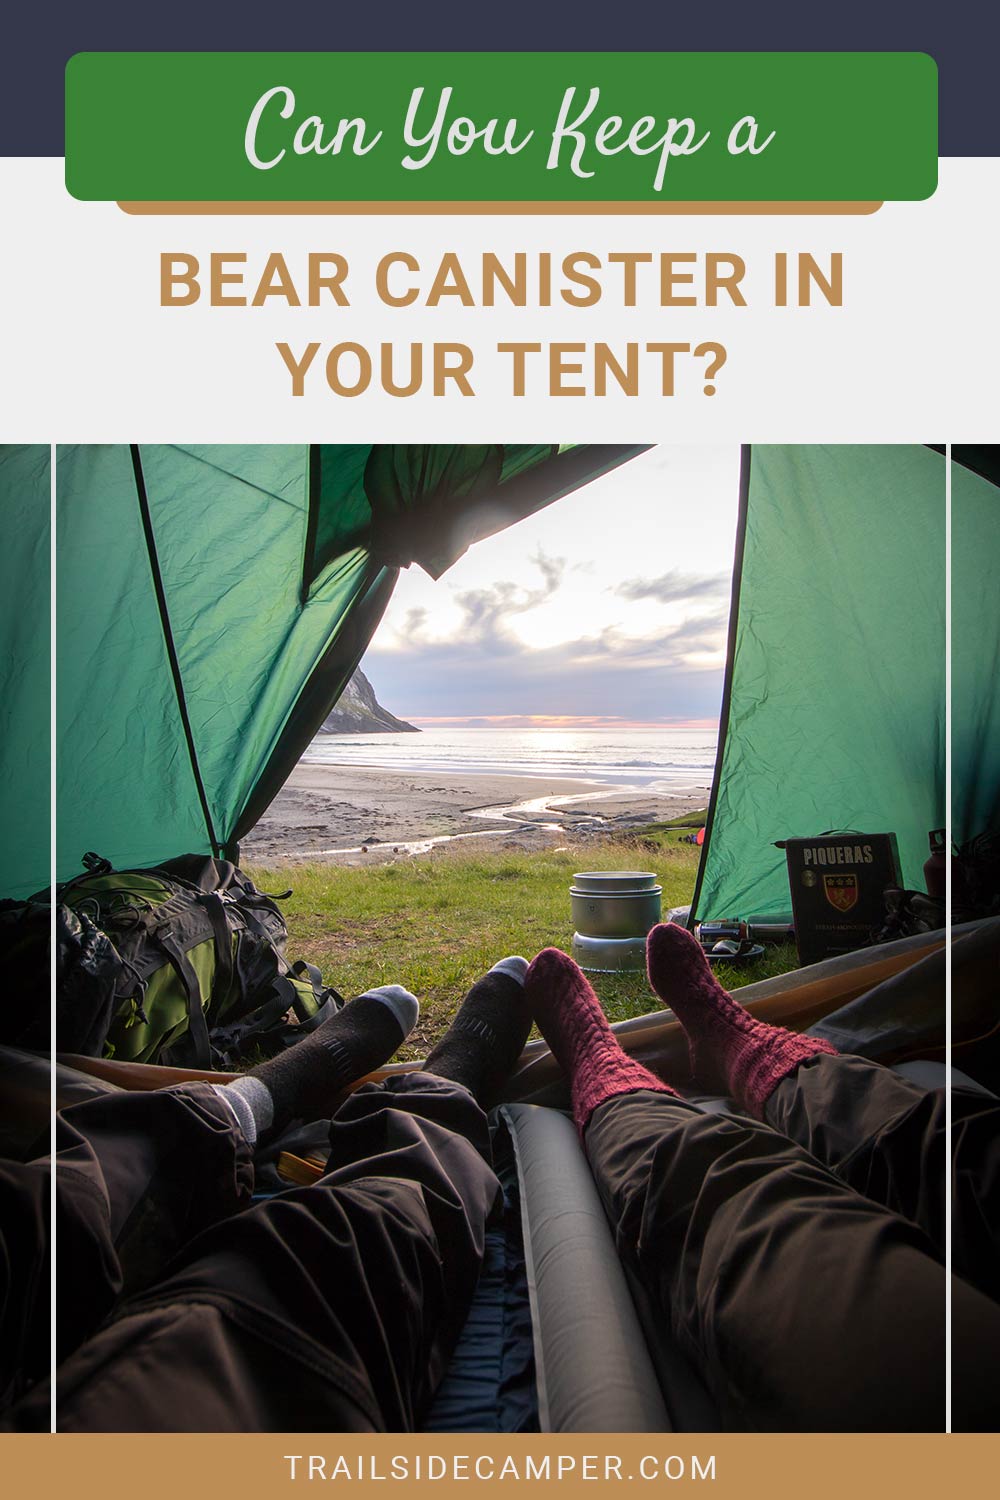 Can You Keep a Bear Canister in Your Tent?